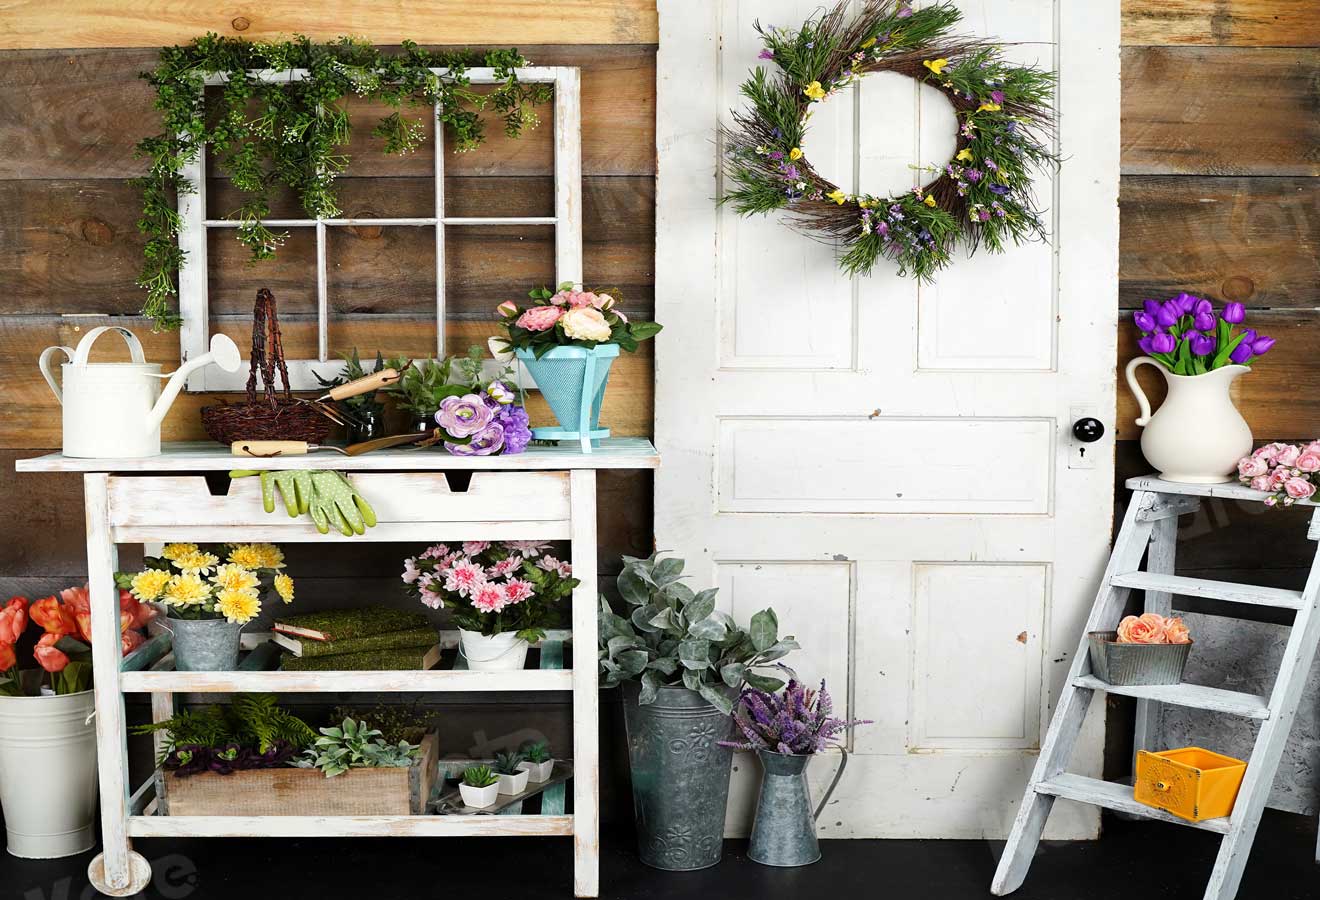 Kate Retro Door Backdrop Flowers Decoration Garden Shed designed by Arica Kirby